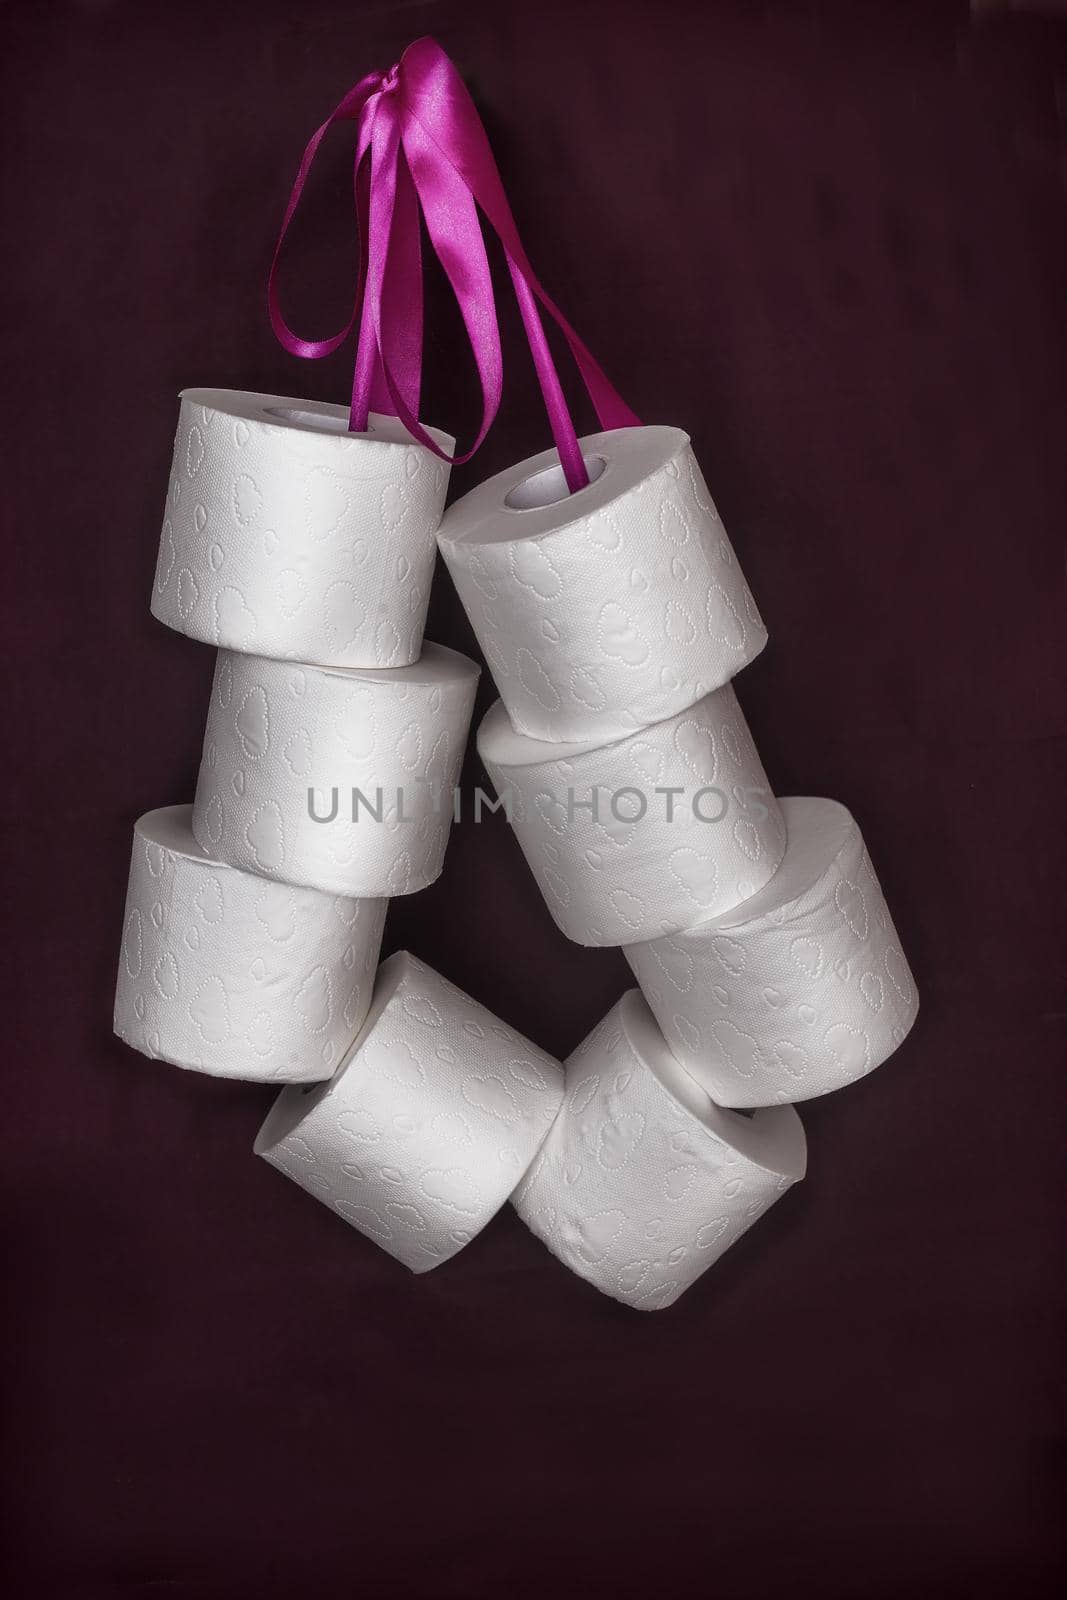 Toilet paper rolls connected by a ribbon in a bundle. by georgina198